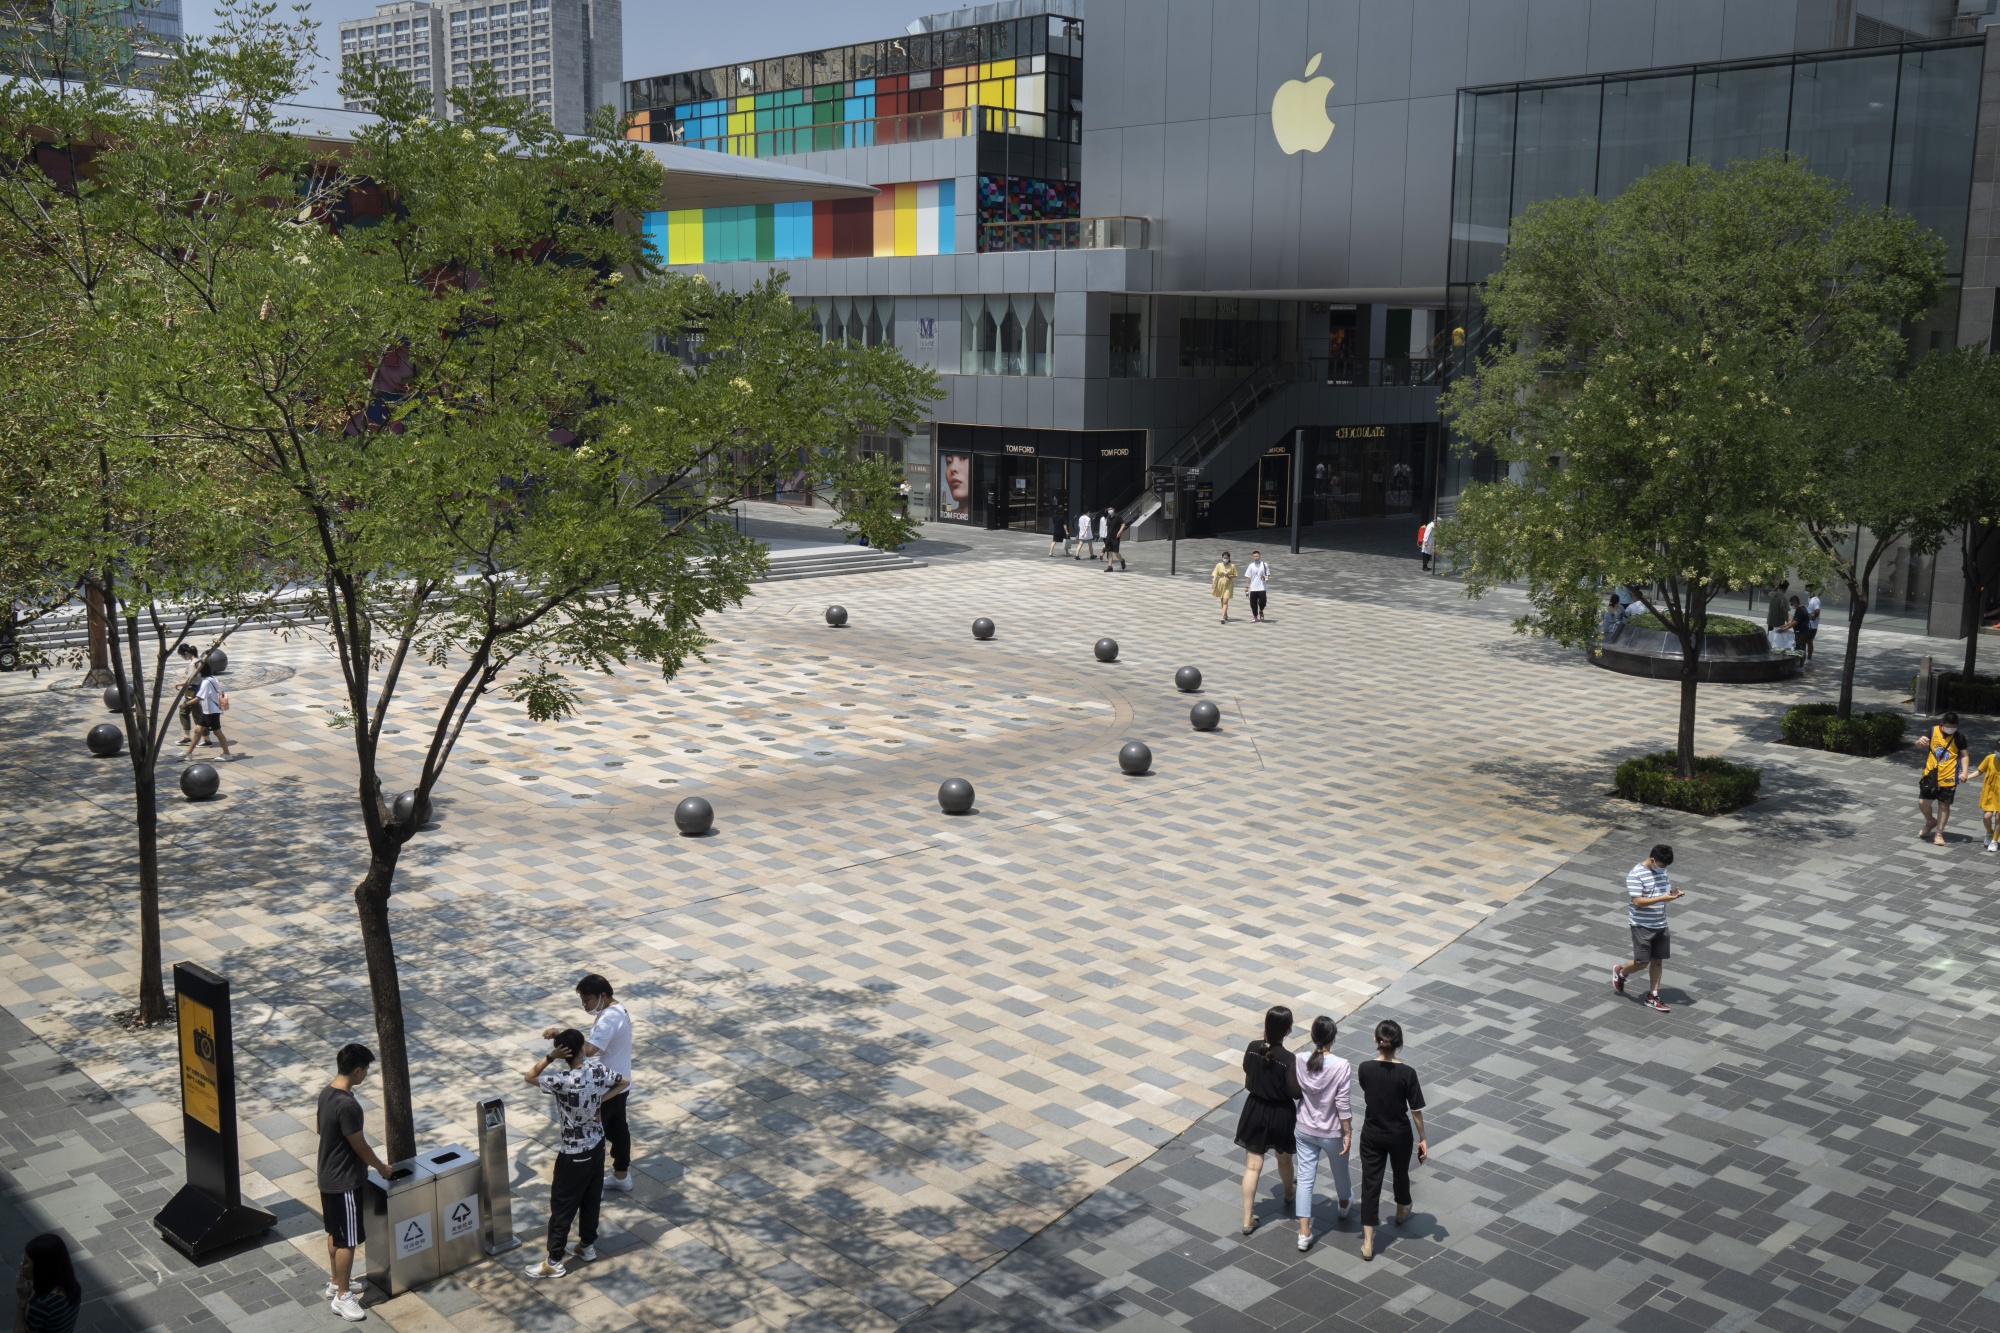 Pedestrians walk through a plaza in front of an Apple Inc. store in the Sanlitun area in Beijing on July 15.